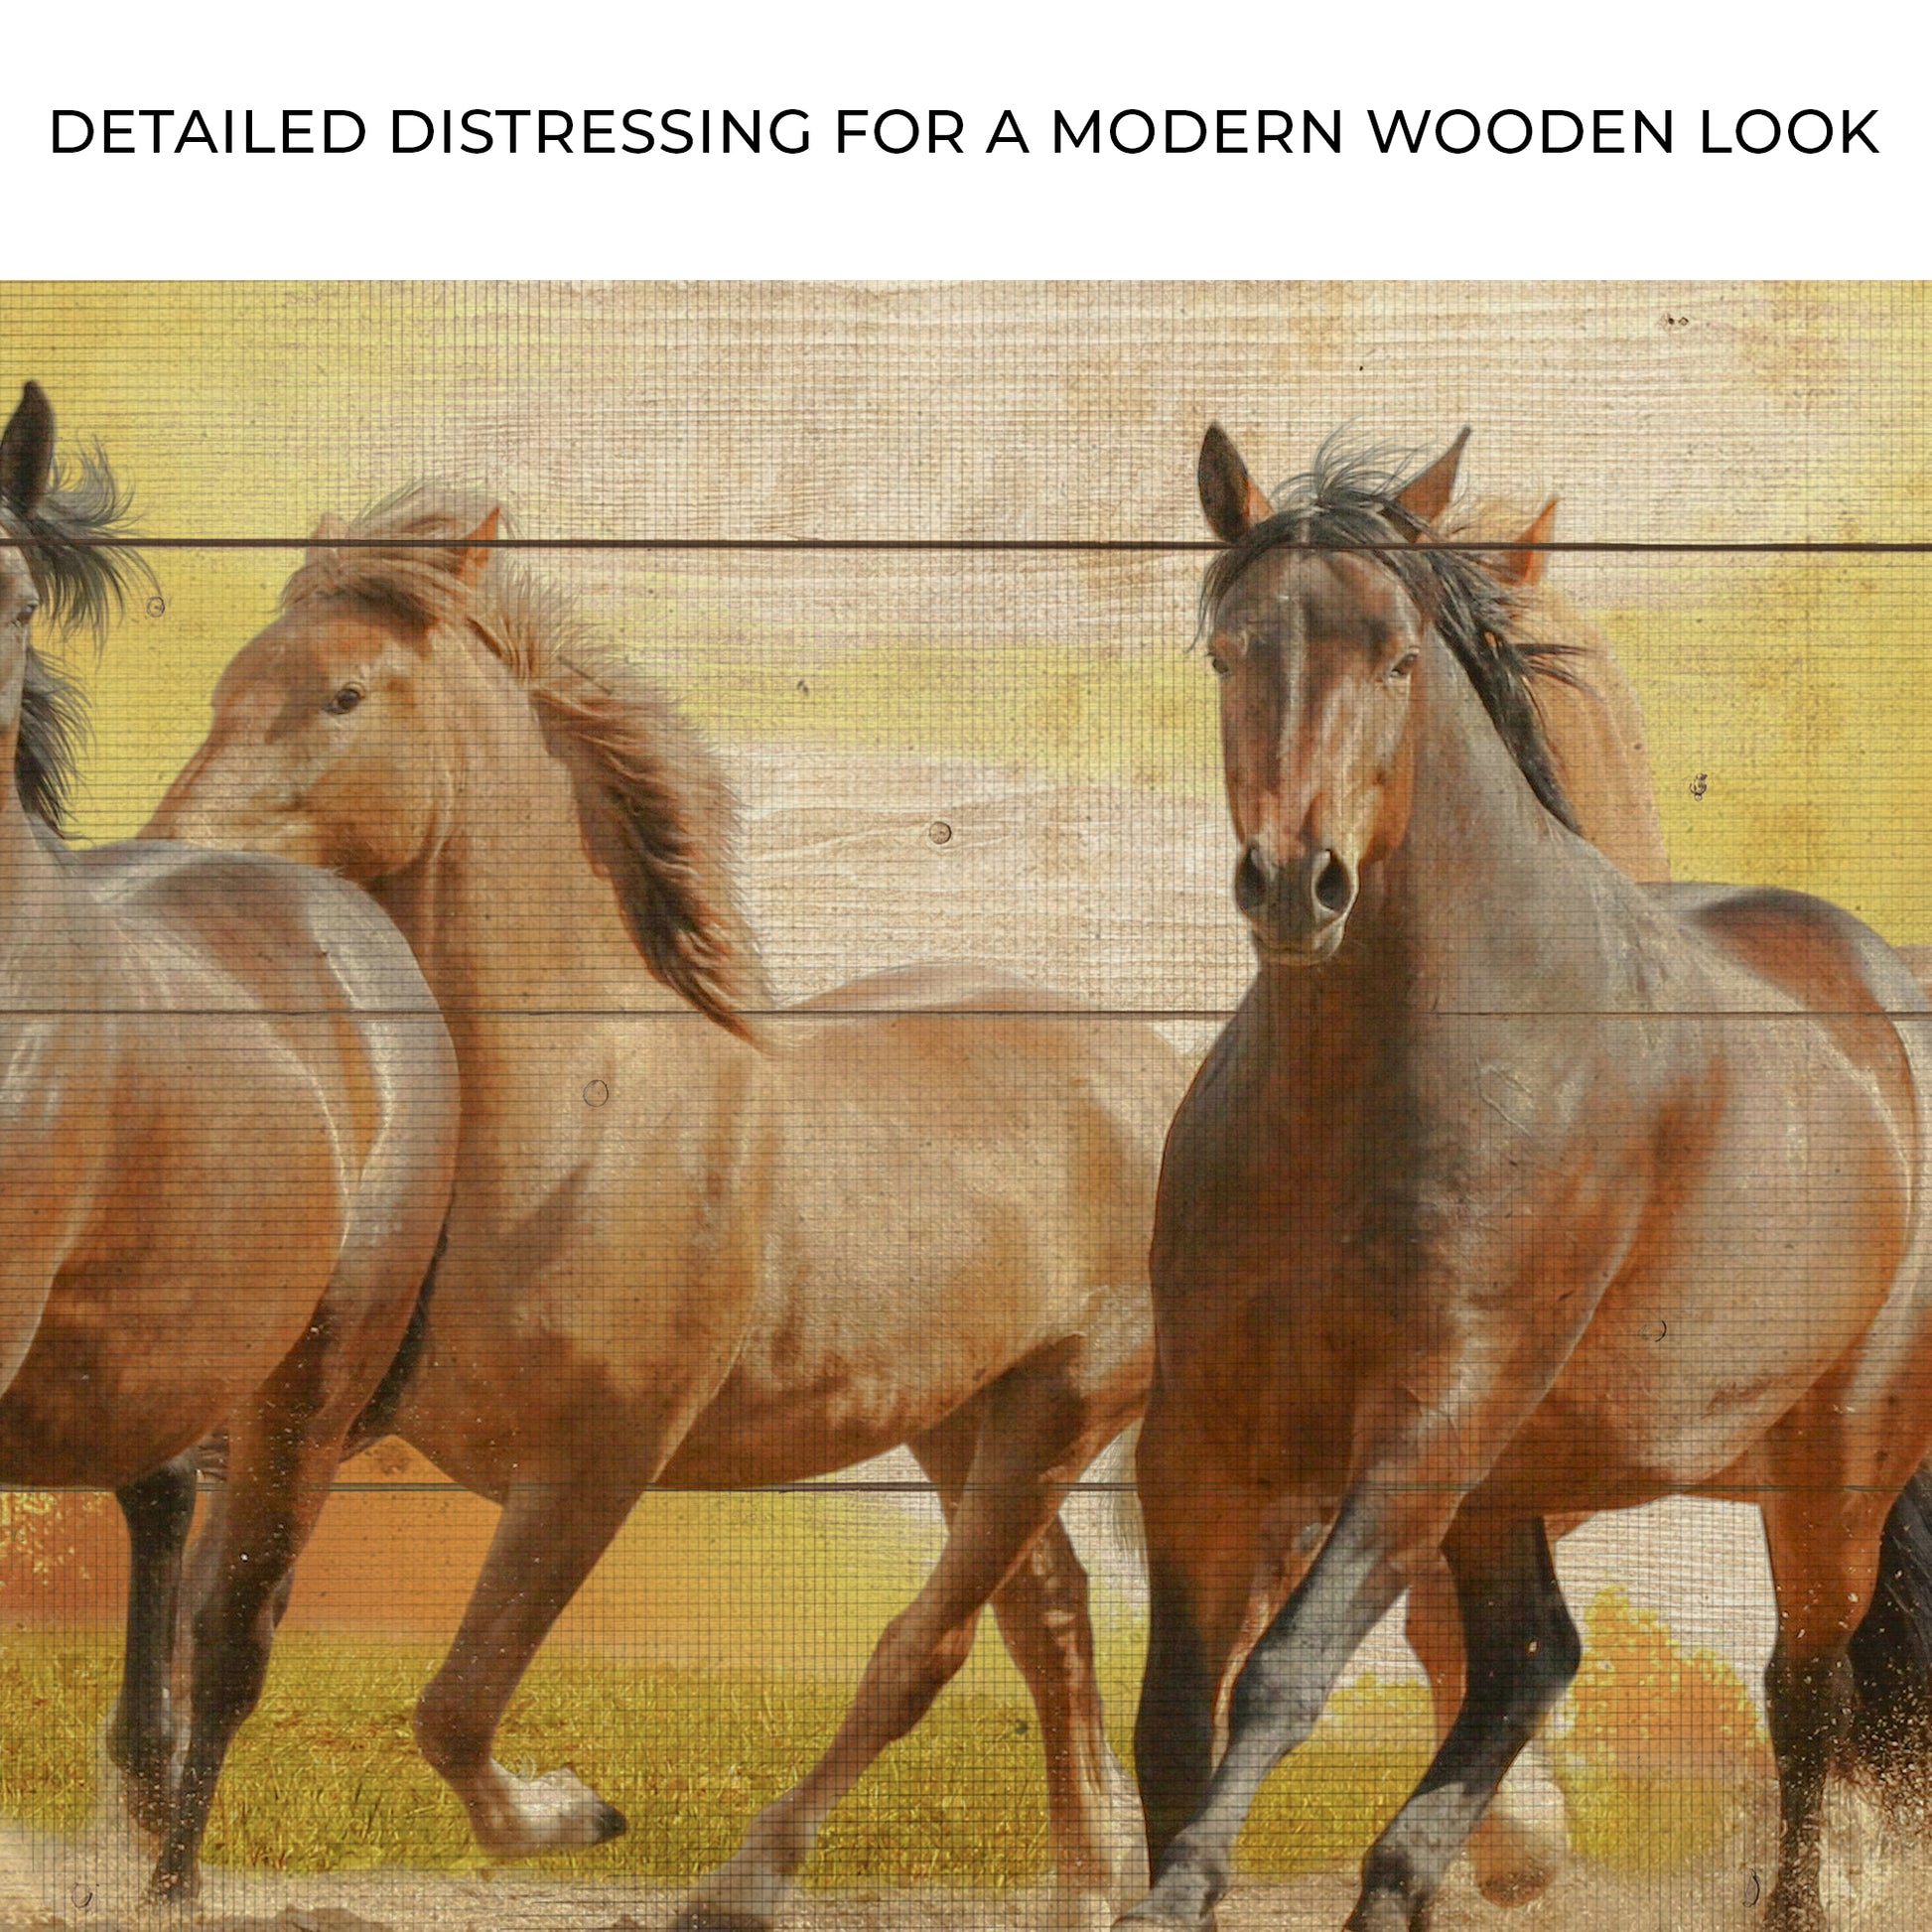 Galloping Wild Horses Canvas Wall Art Zoom- Image by Tailored Canvases